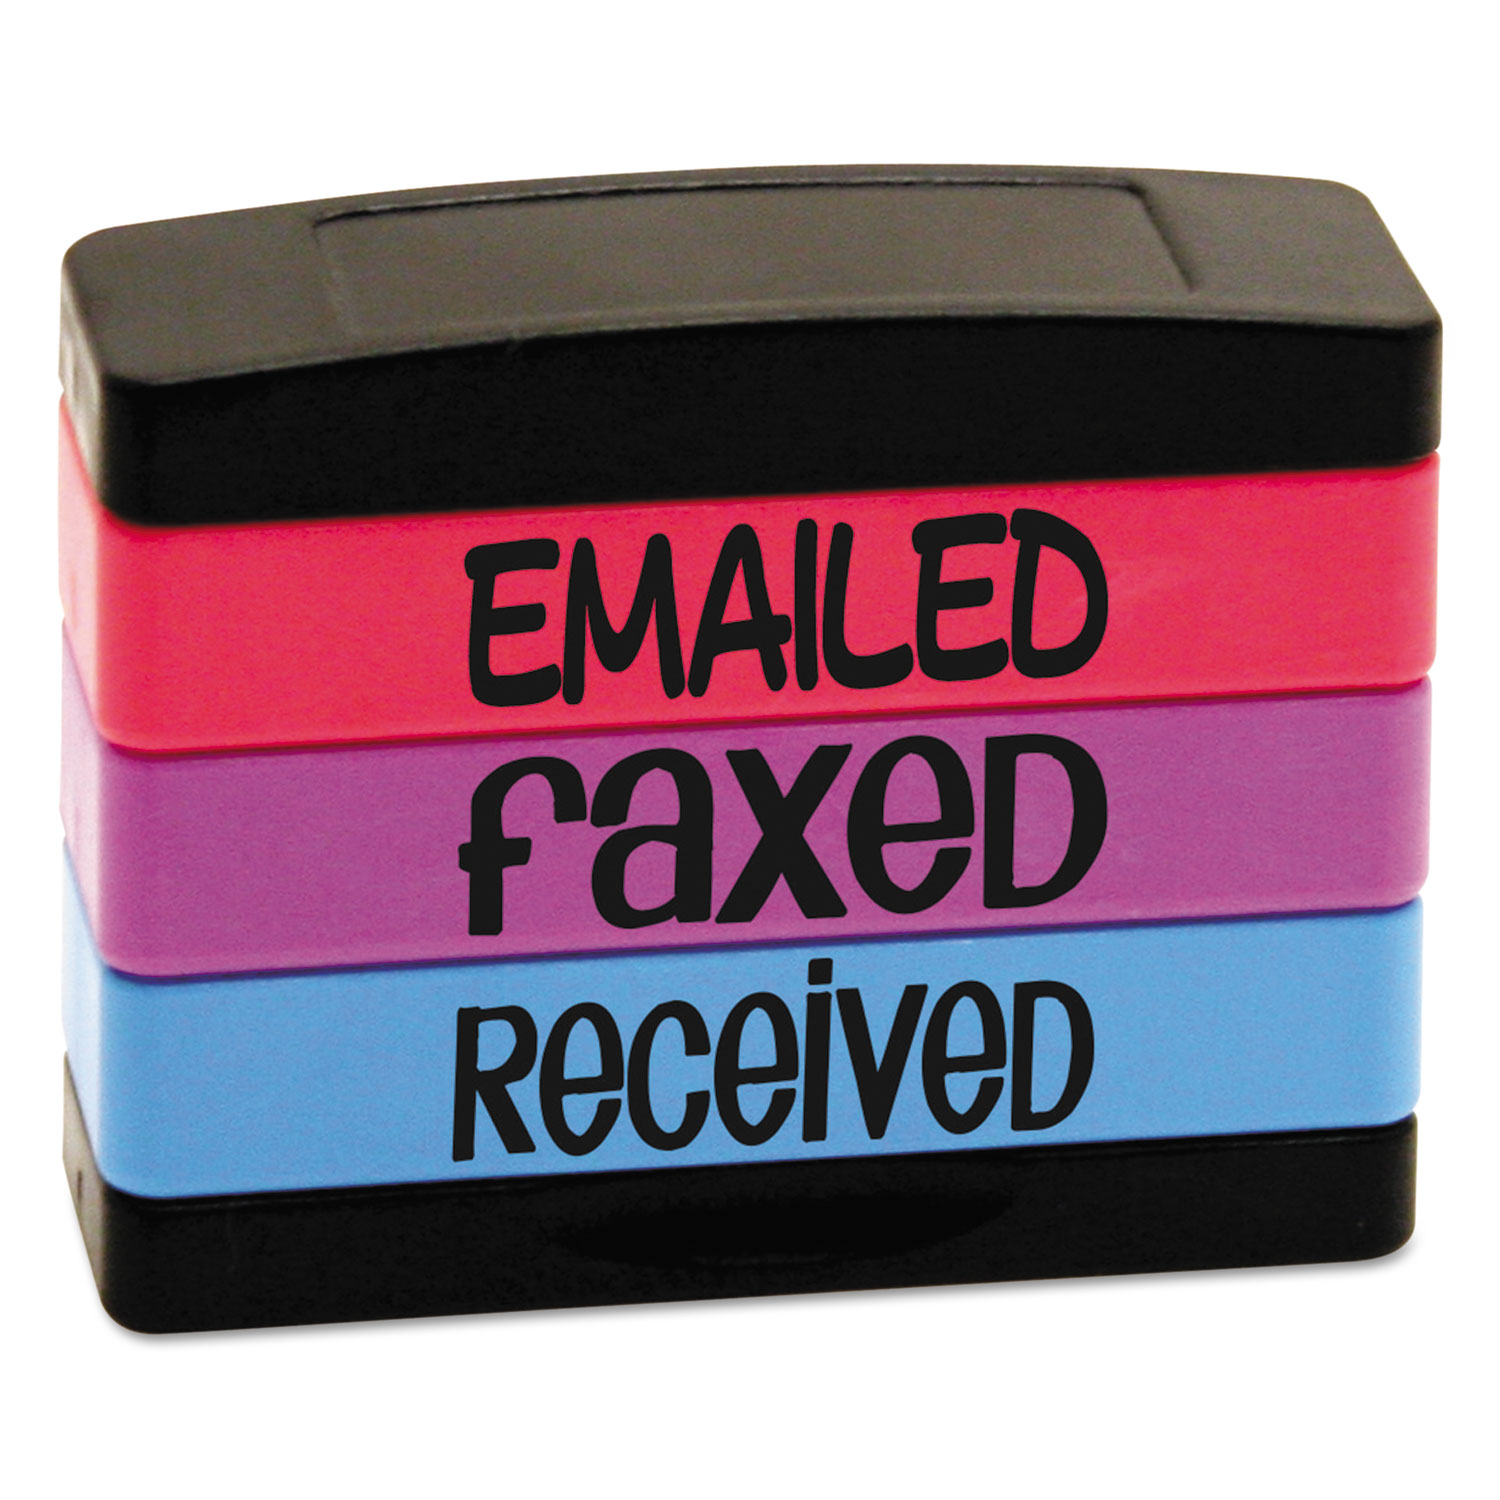  Stack Stamp 8800 Stack Stamp, EMAILED, FAXED, RECEIVED, 1 13/16 x 5/8, Assorted Fluorescent Ink (USS8800) 